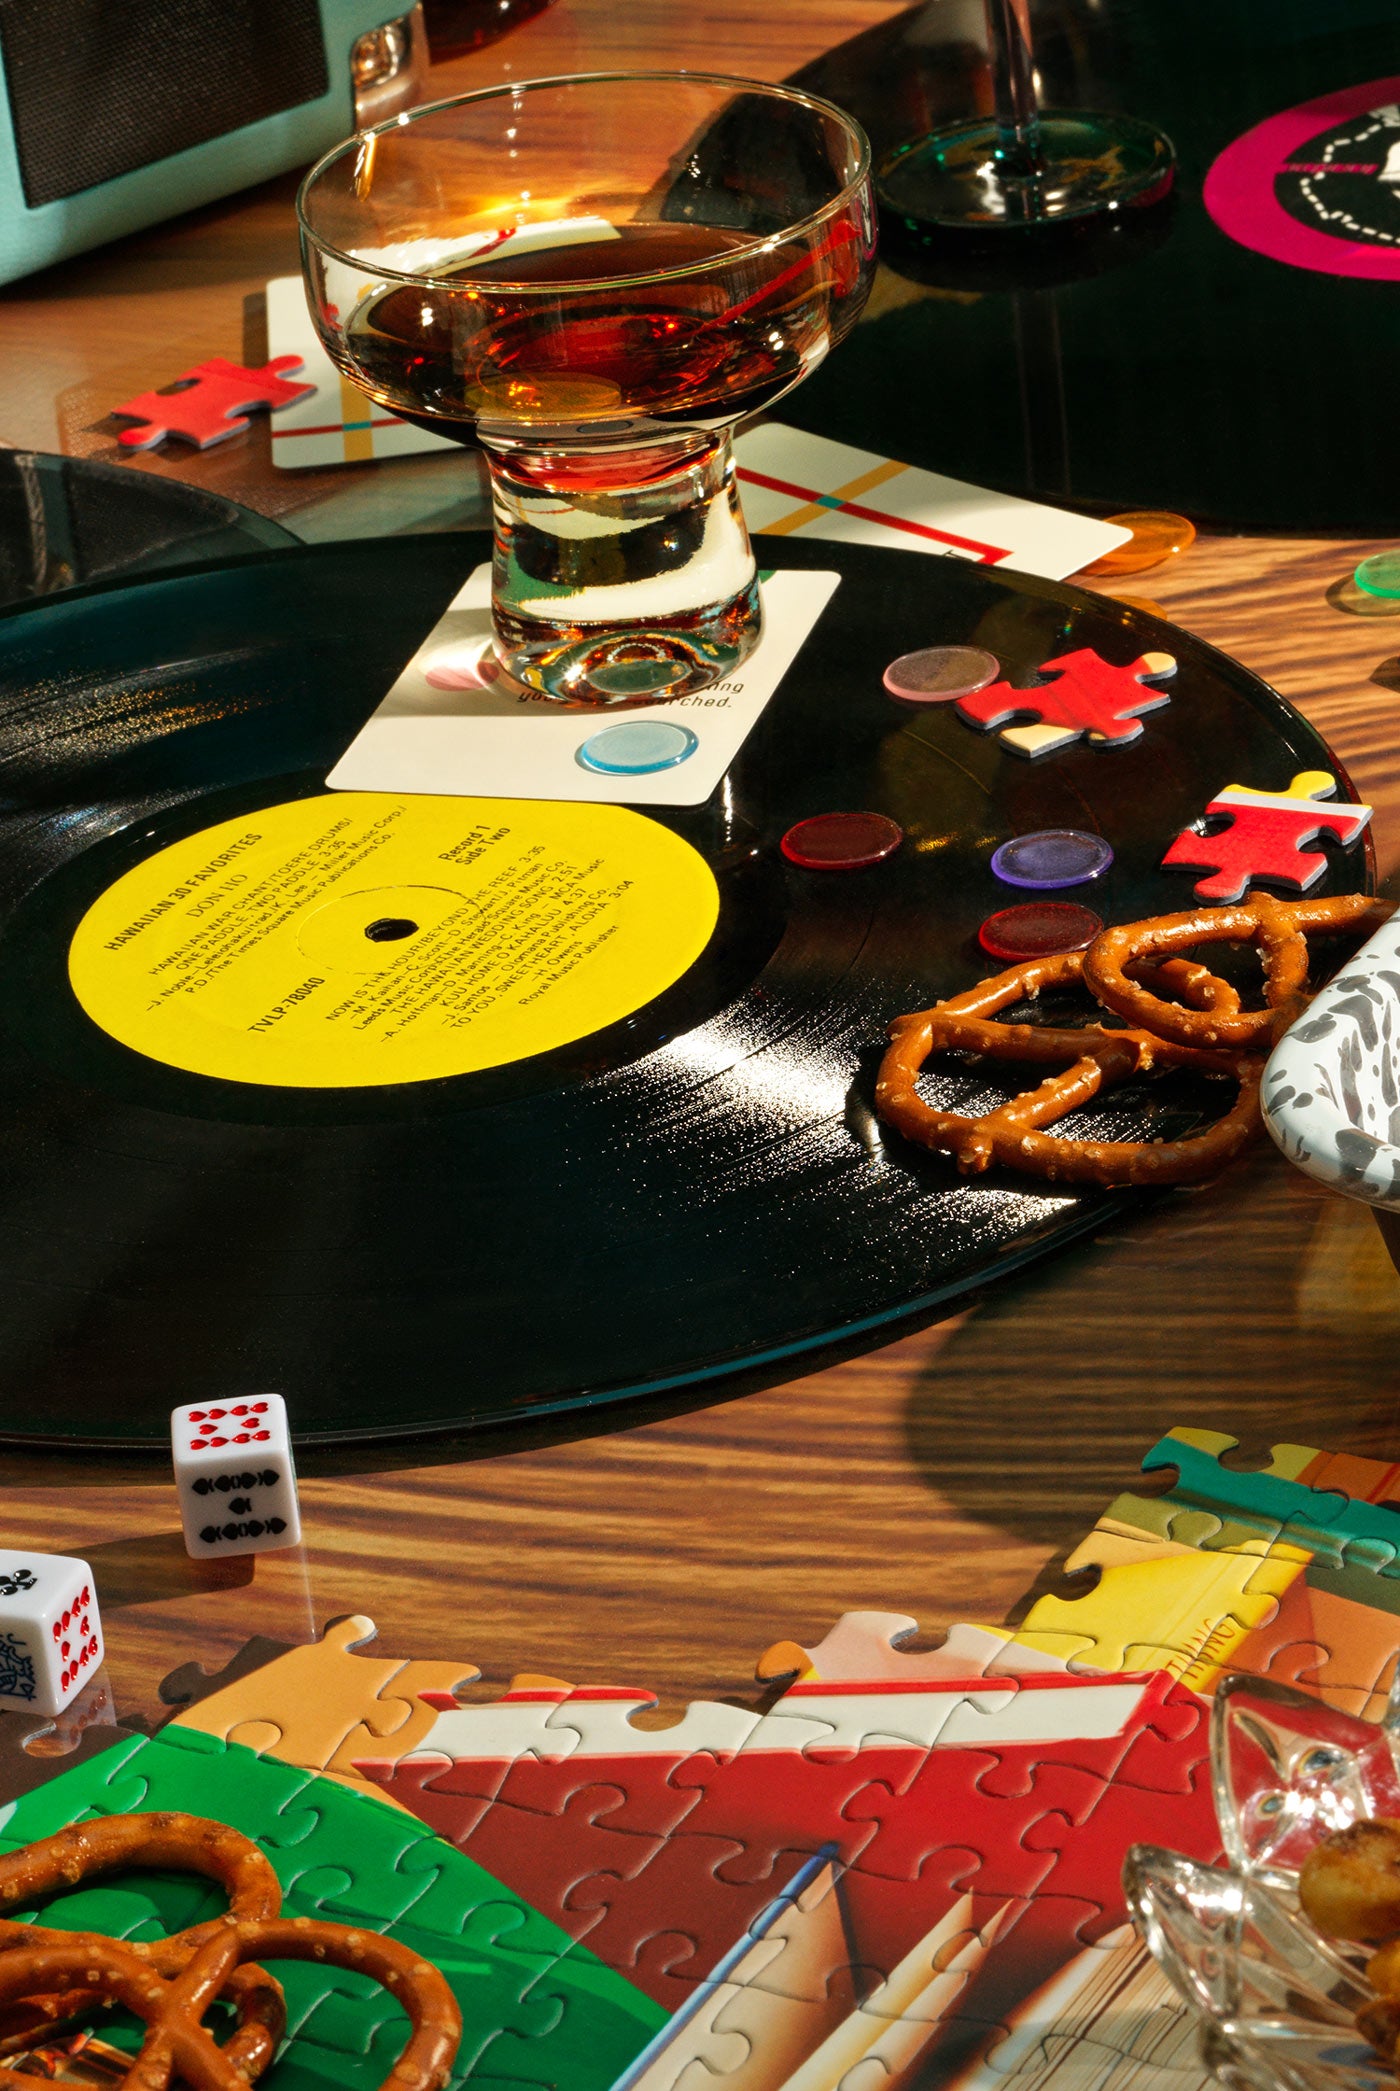 A table scene featuring a record player, cocktails and a puzzle tray filled with puzzle pieces.